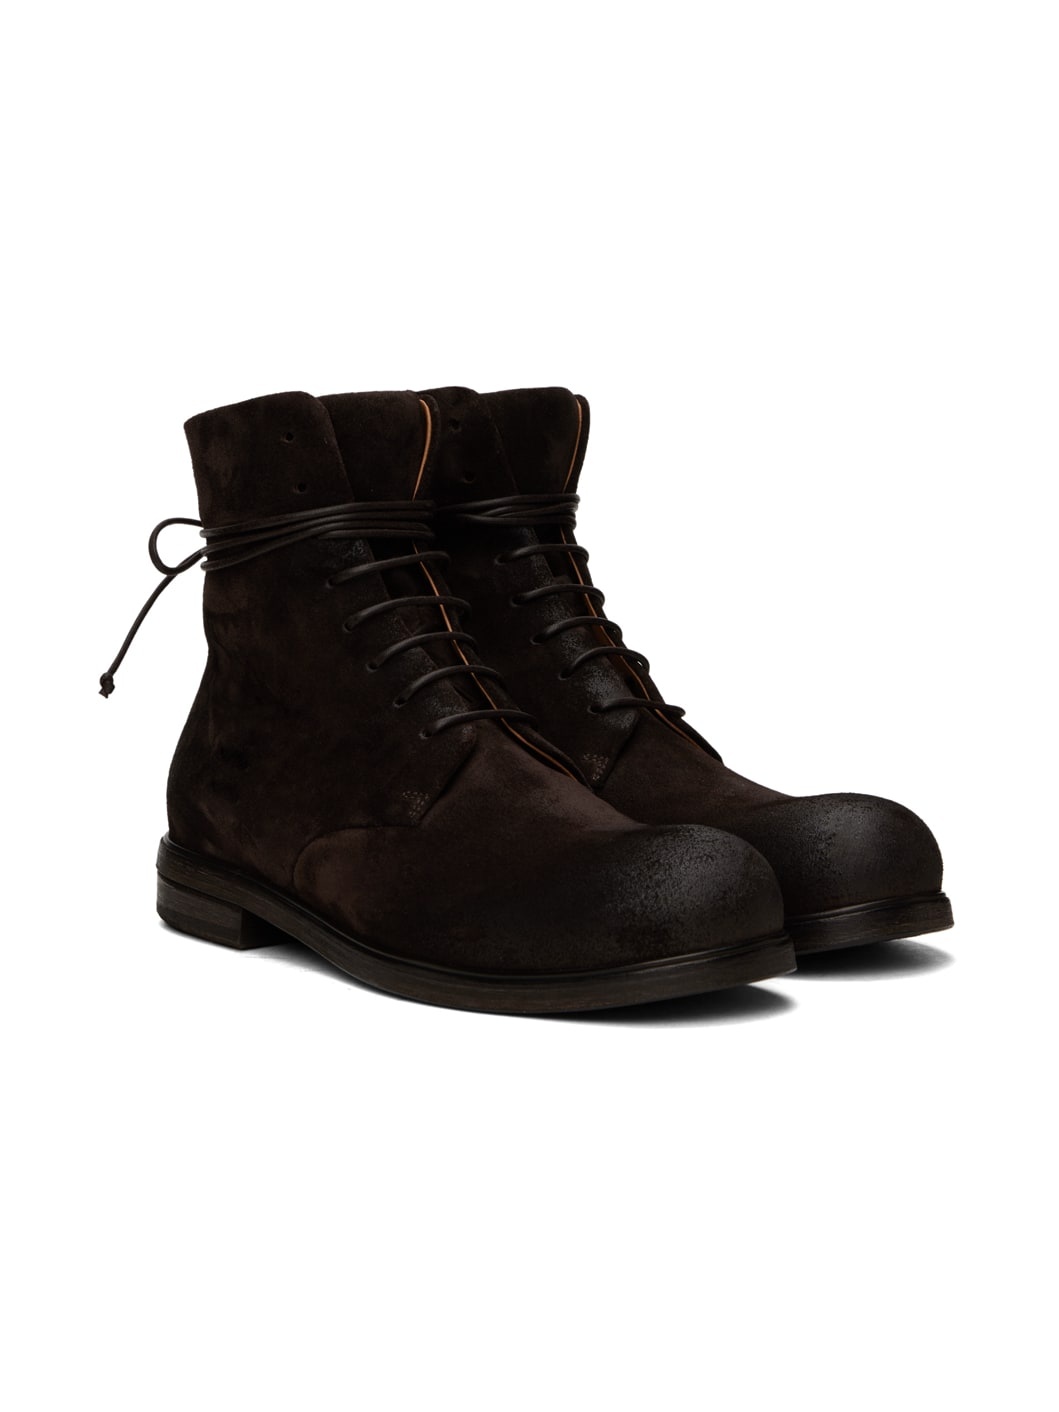 Brown Zucca Media Lace-Up Ankle Boots - 4